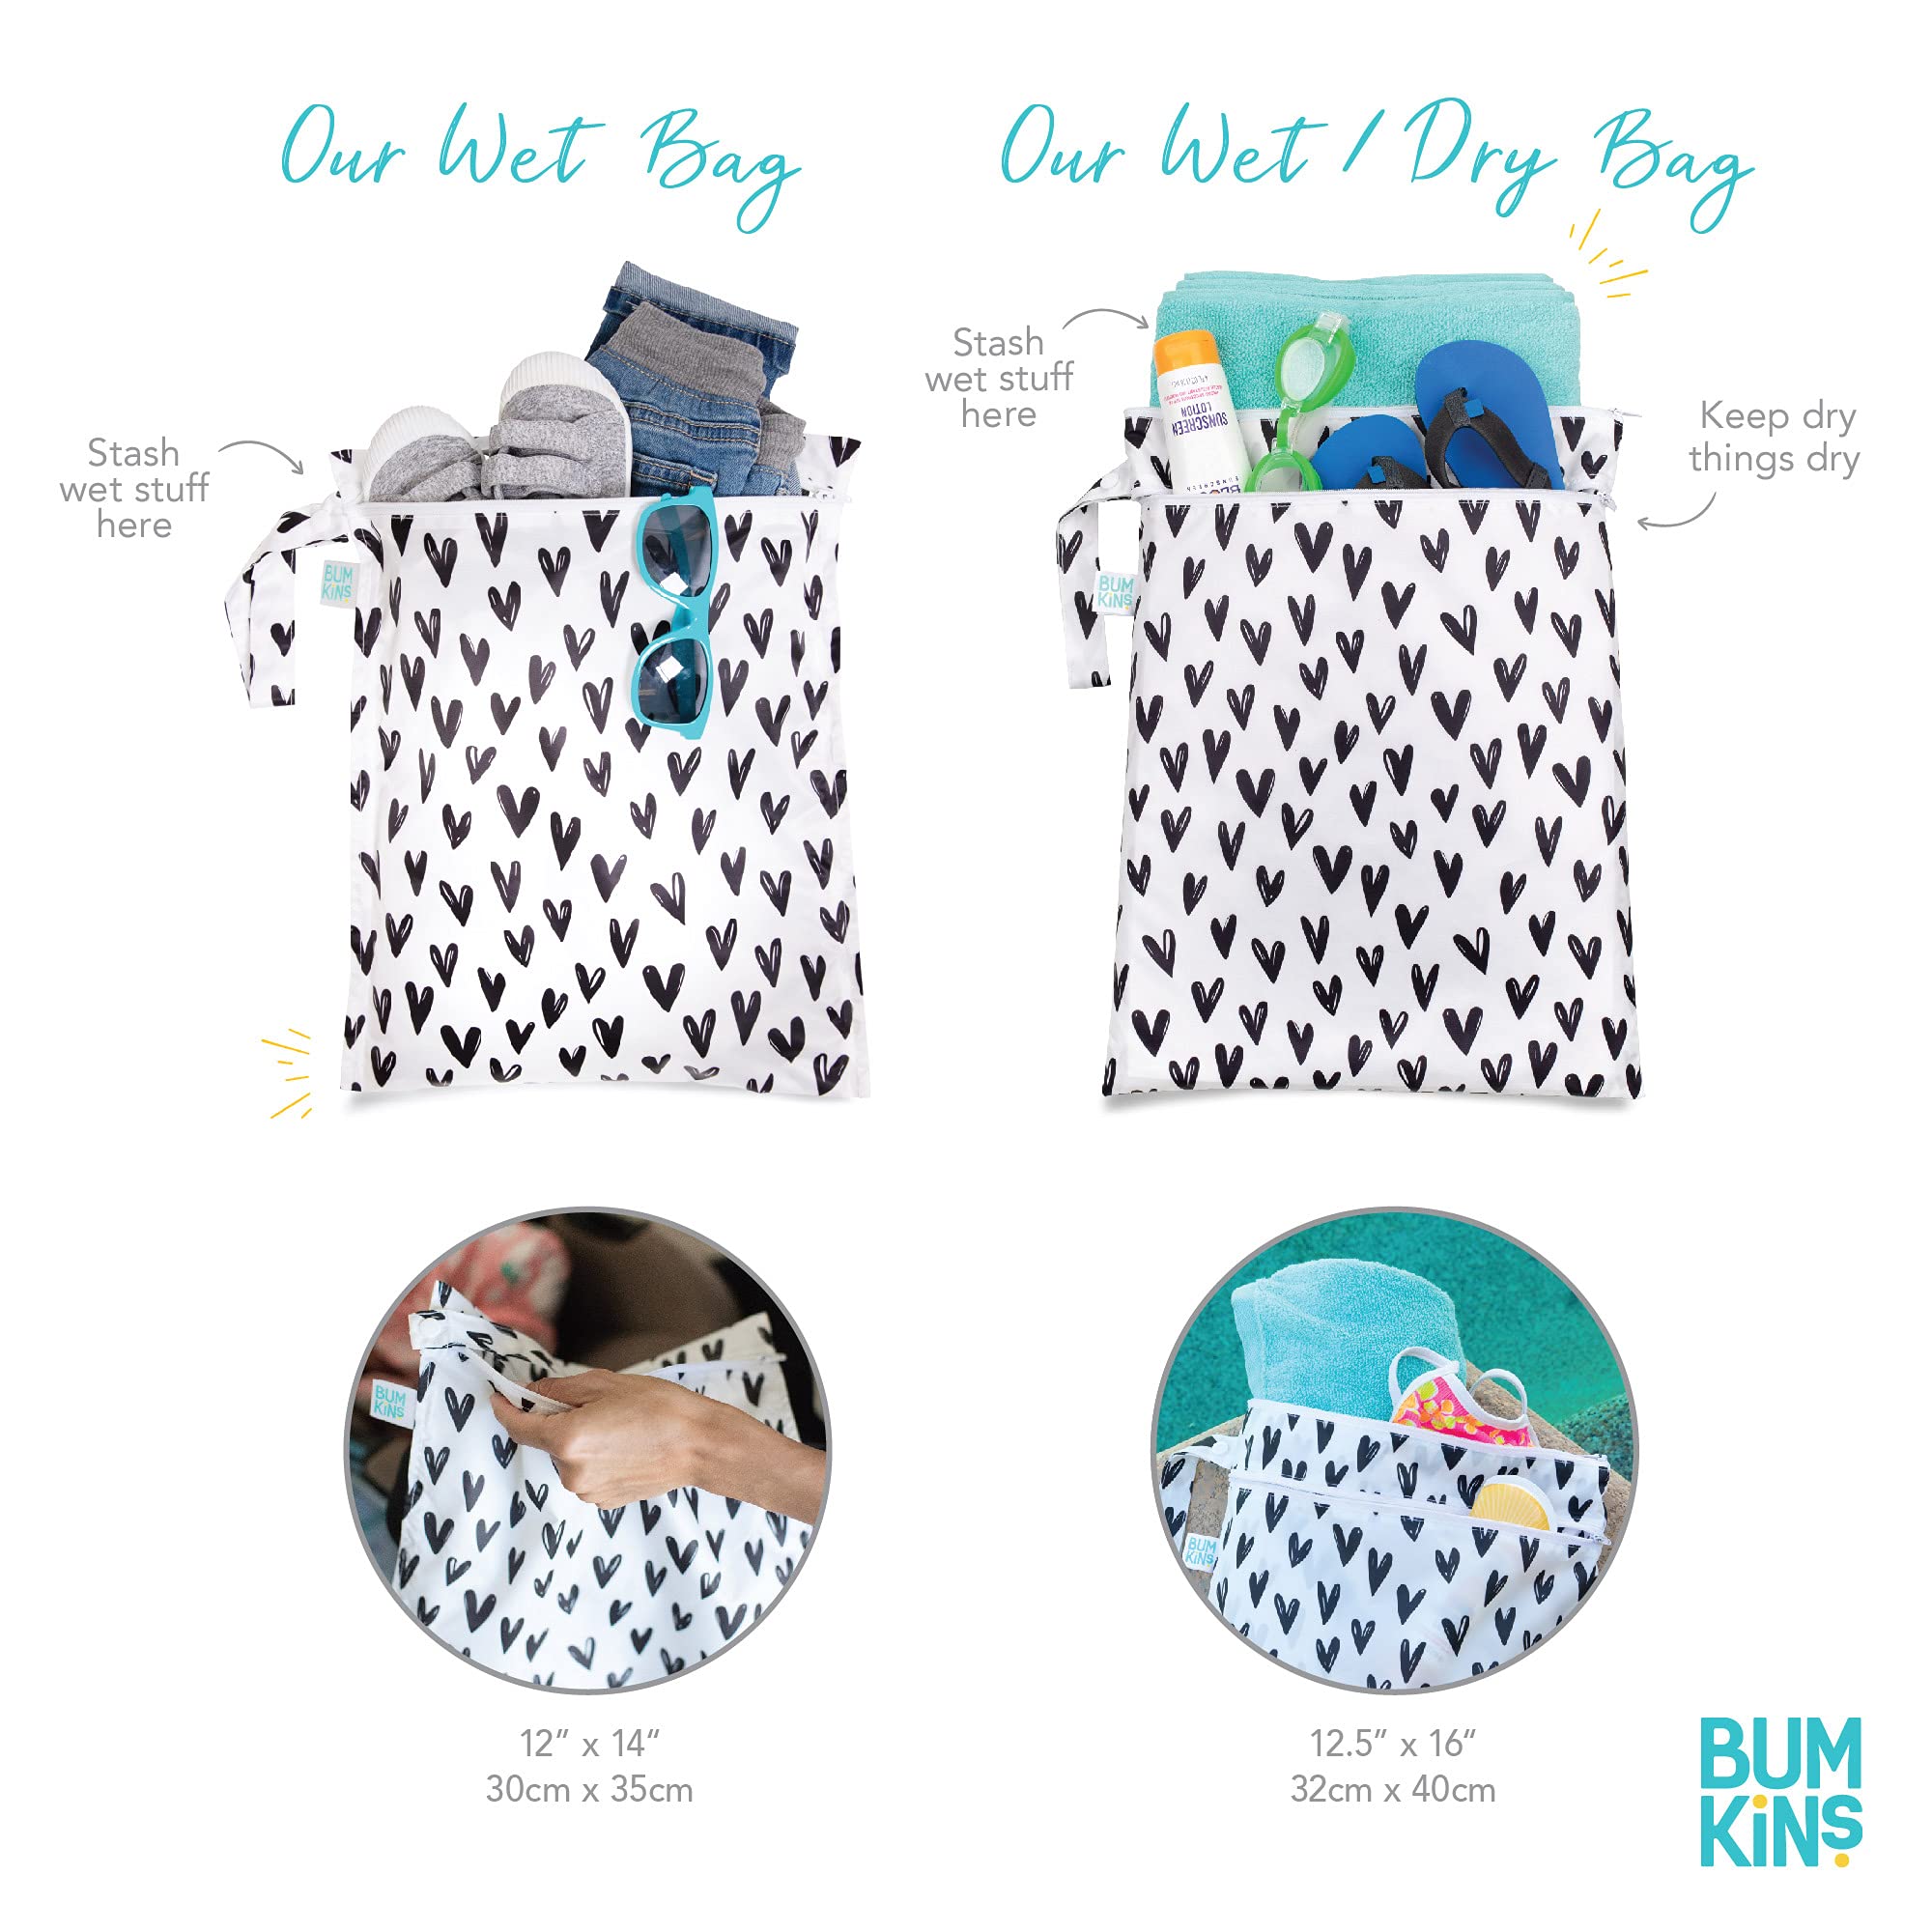 Bumkins Waterproof Wet Bags for Baby, Travel, Swimsuit, Cloth Diapers, Pump Parts, Gym Clothes, Toiletries, Strap to Stroller, Zipper Reusable Bag, Packing Pouch